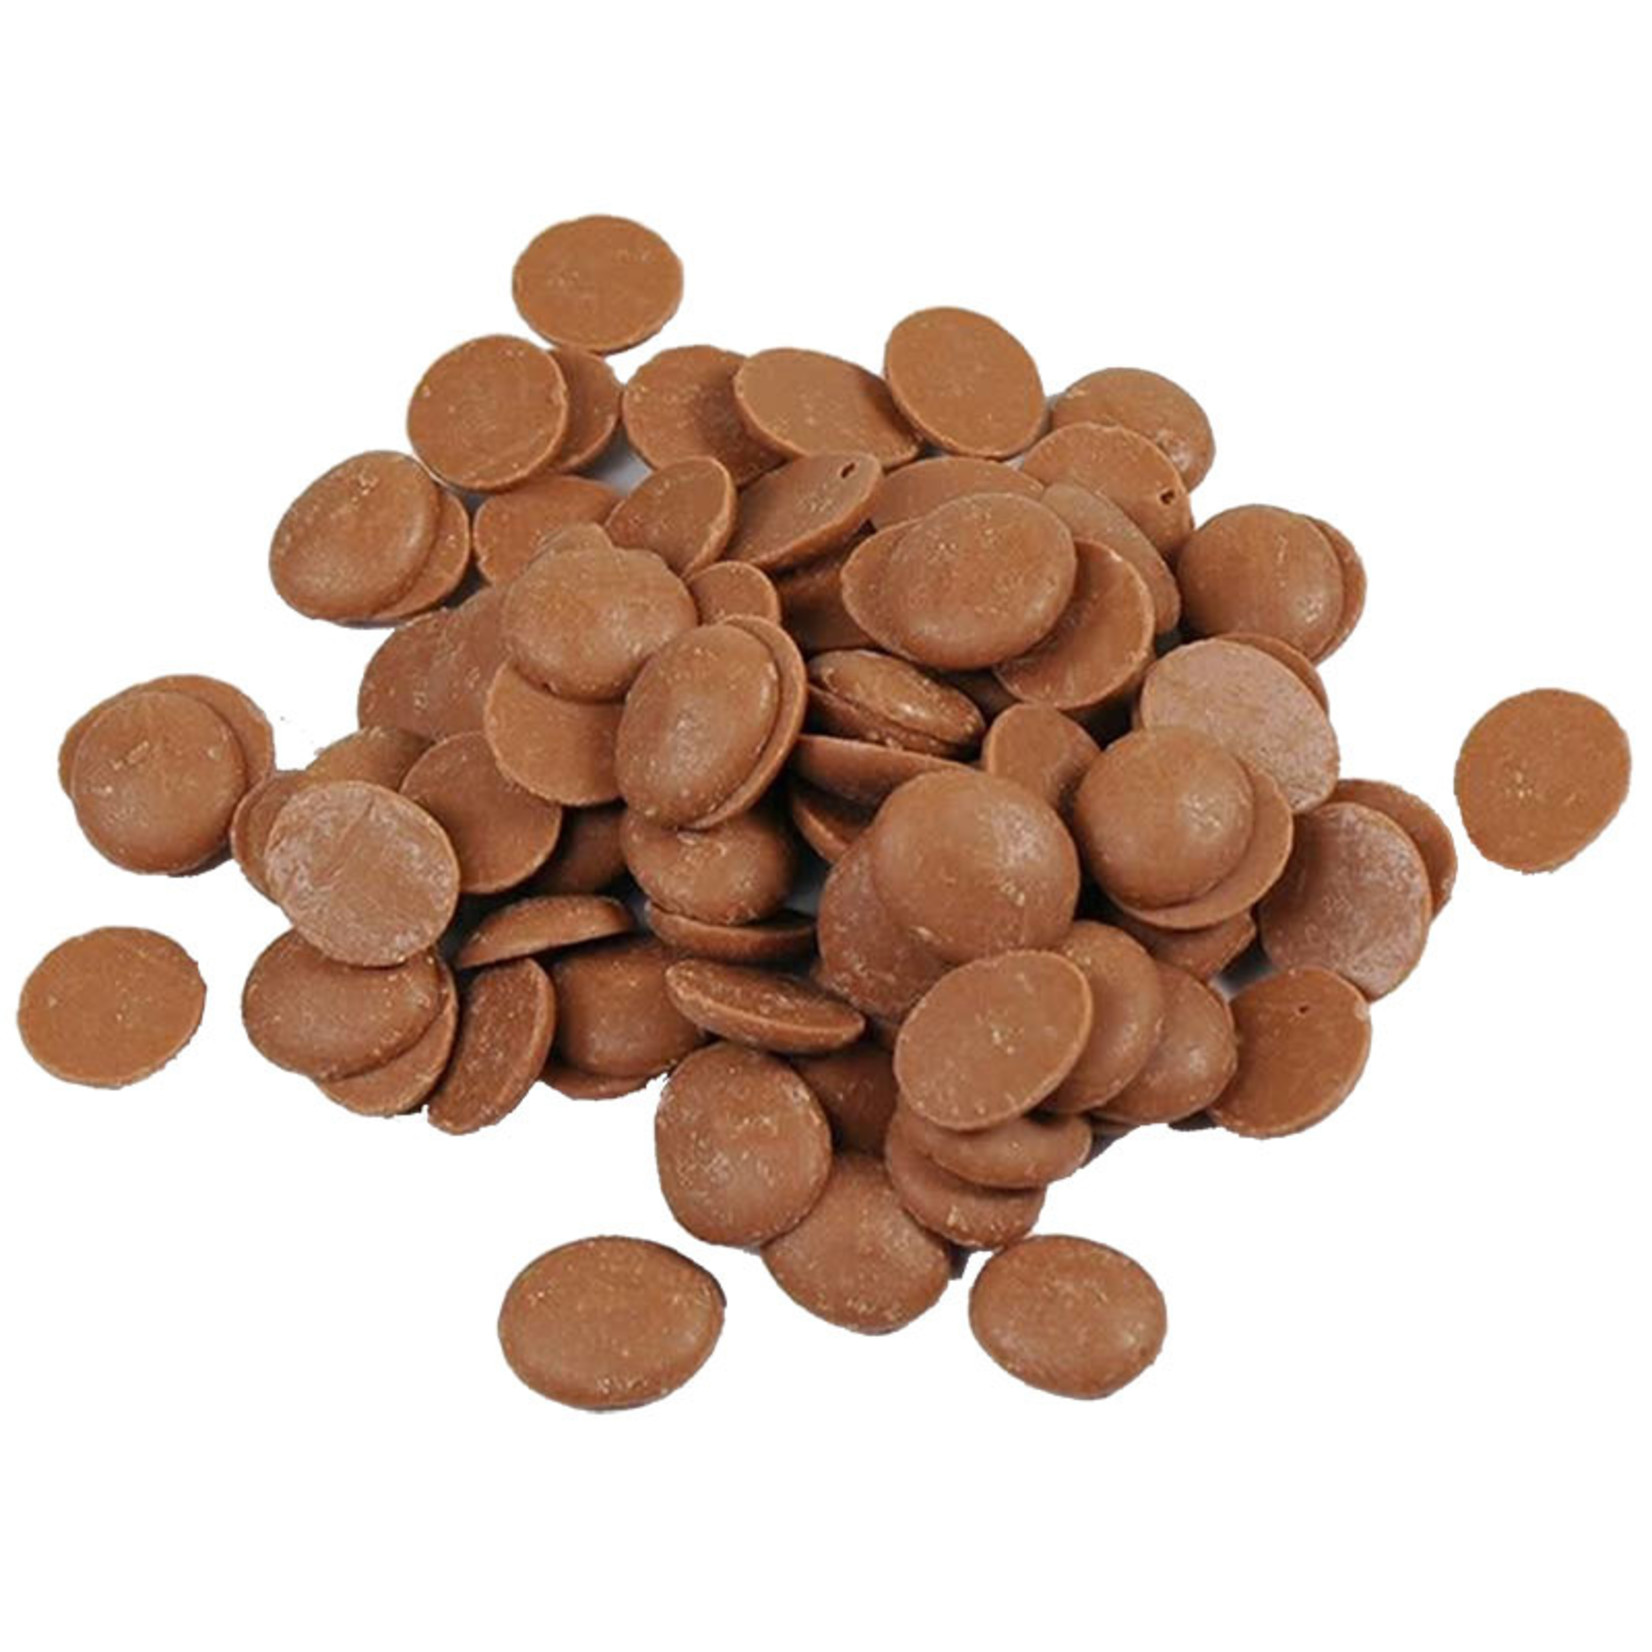 Cacao Barry Cacao Barry - Lactee Barry Equilibre Milk Chocolate 36% - 1 lb, CHM-P35LBEQ-US-U77-R